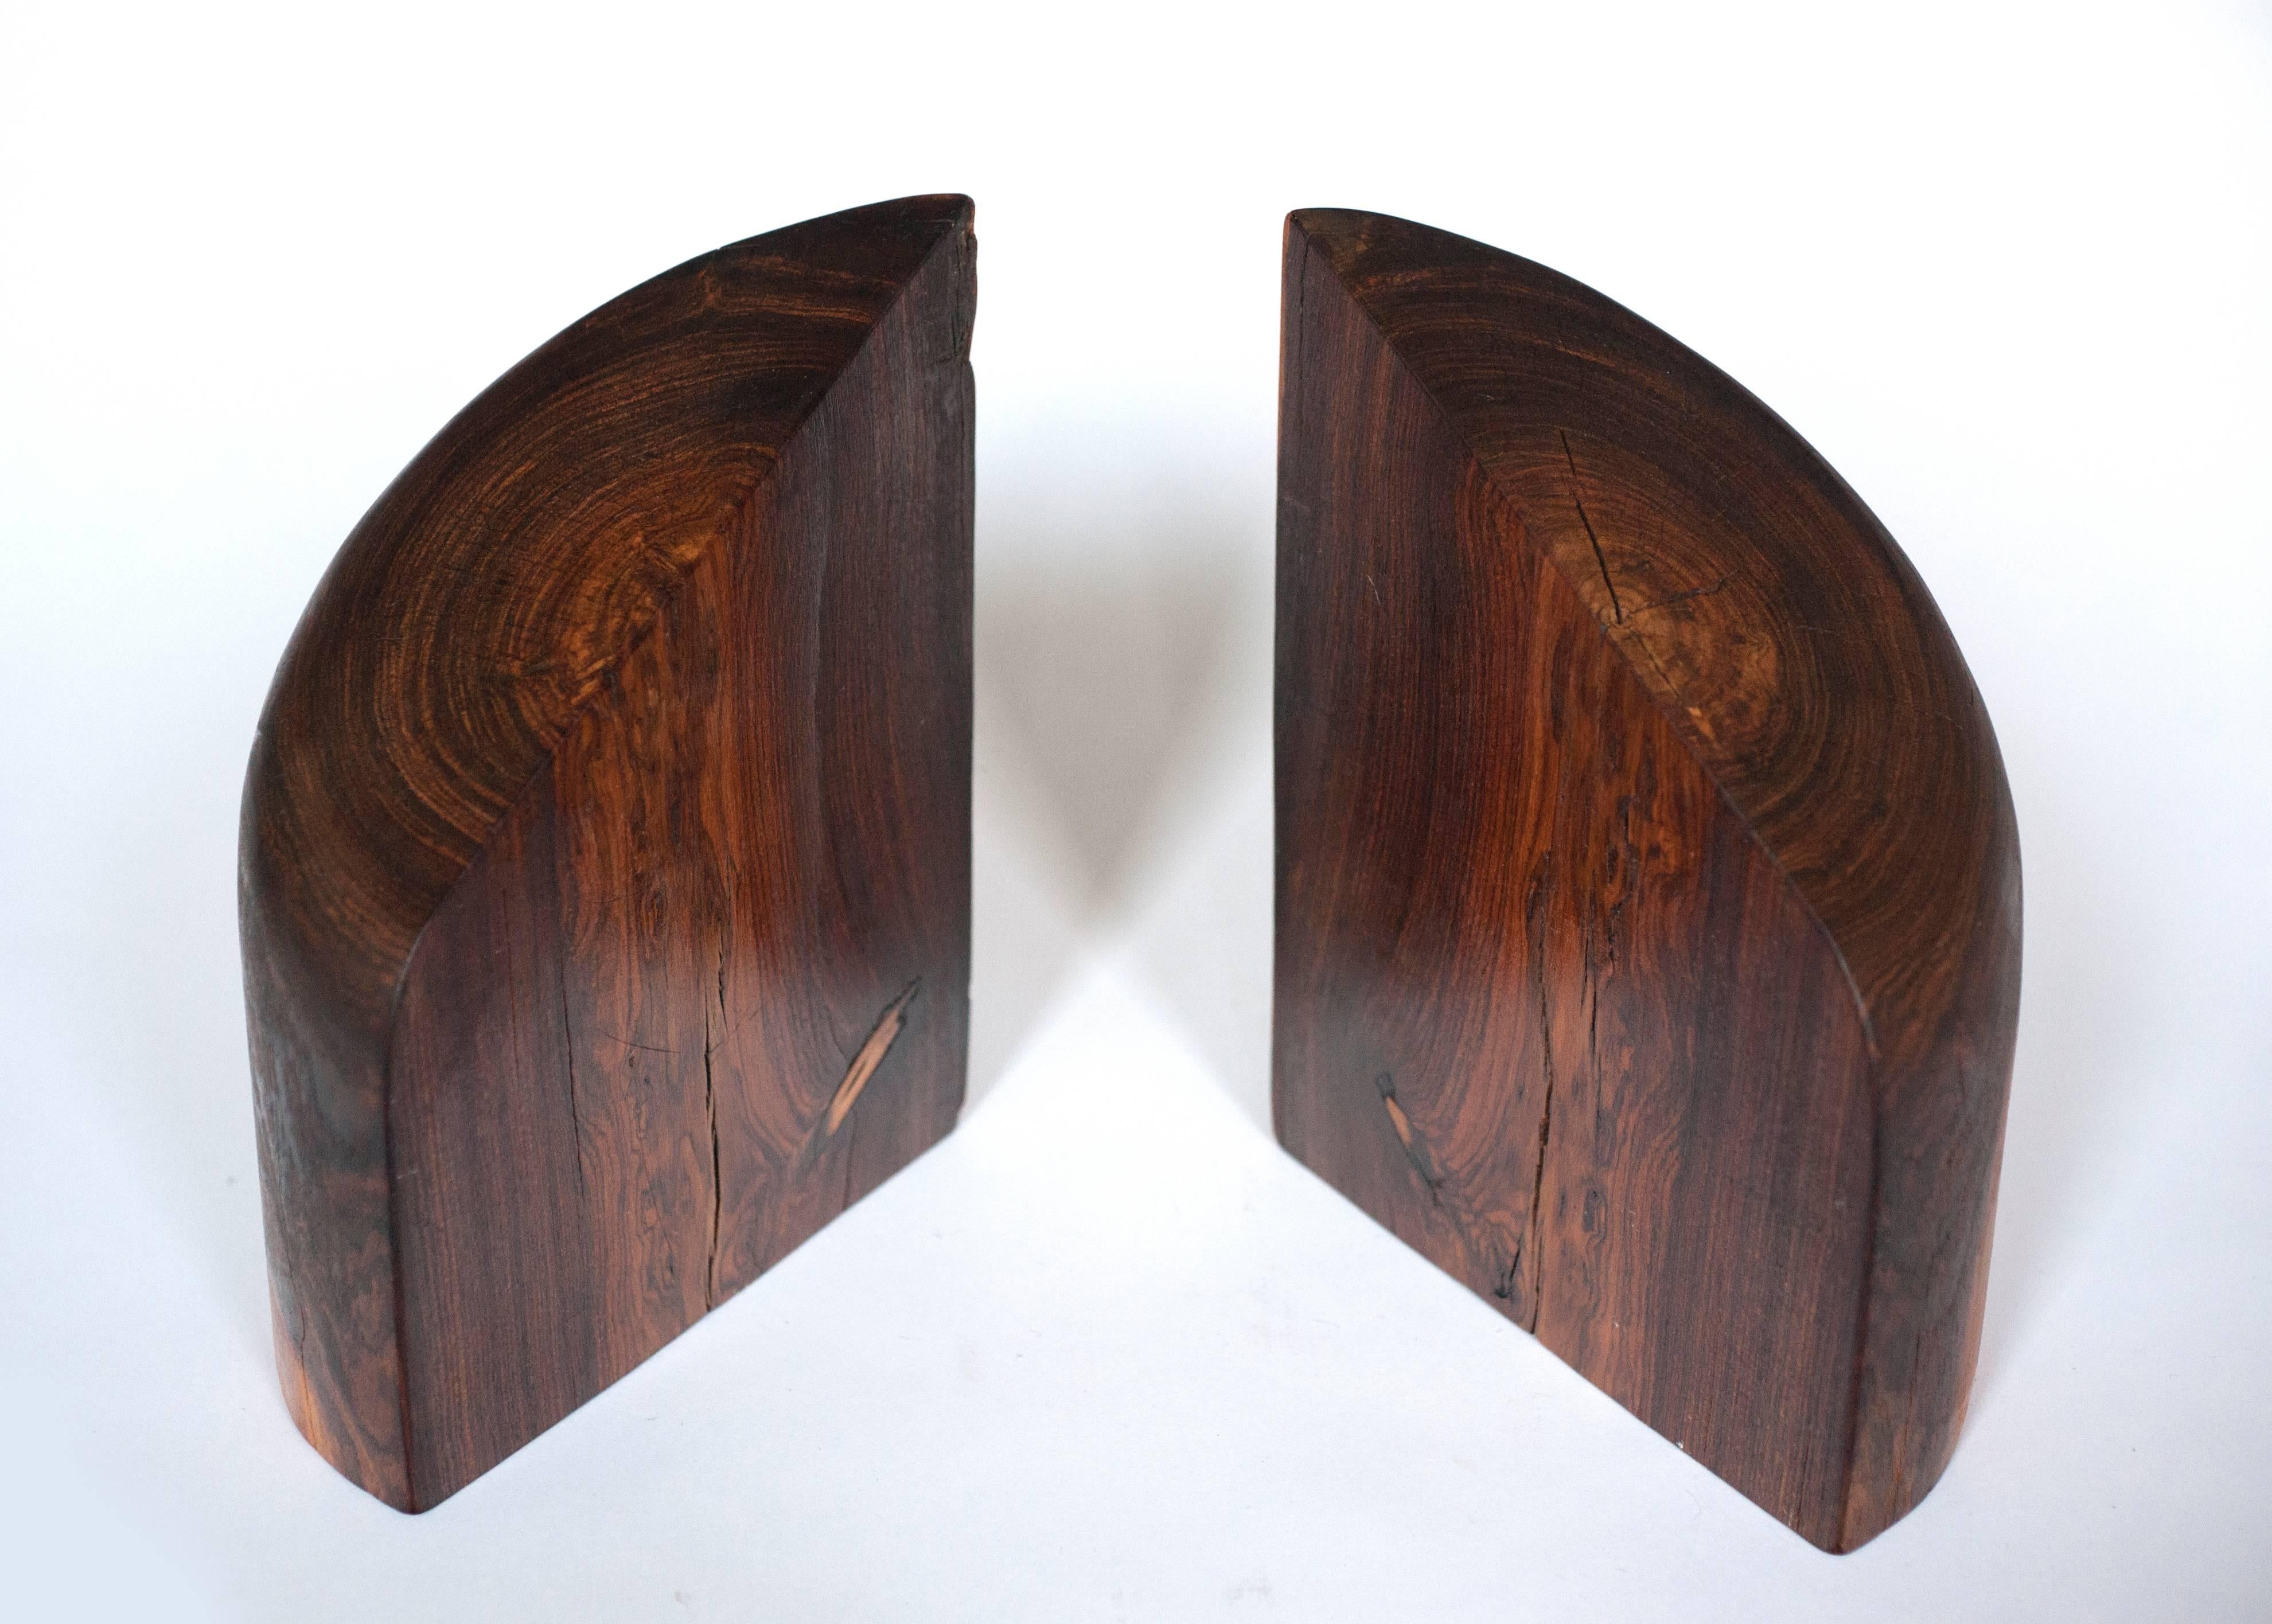 A nice pair of bookends by Don Shoemaker, produced at his Senal, Mexico, studio in the 1960s. Retains partial label.